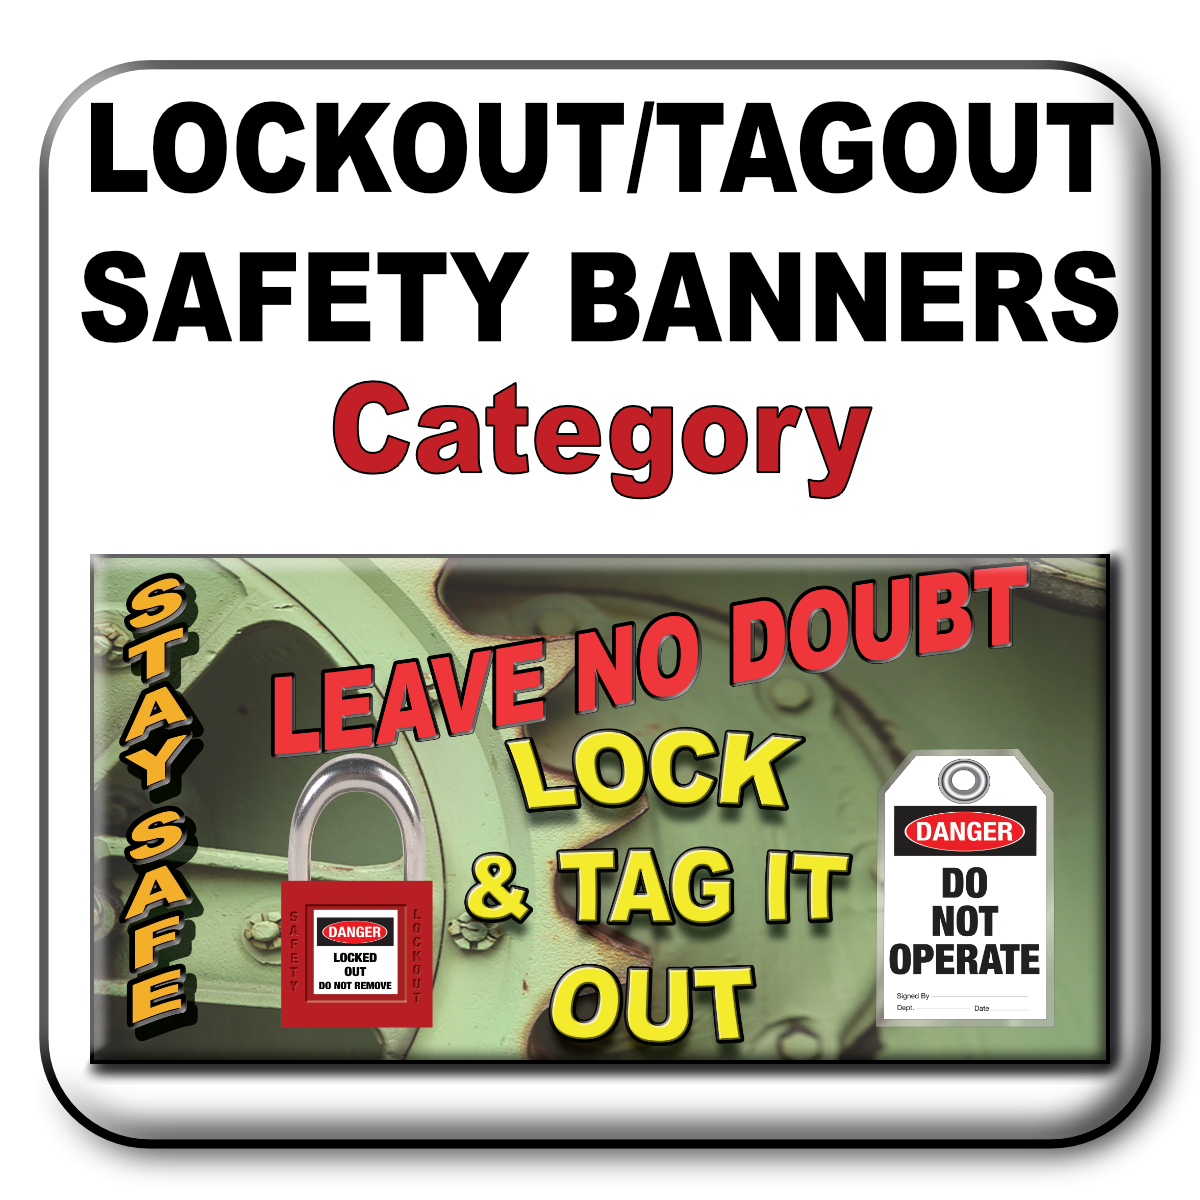 Lockout tagout safety banners button